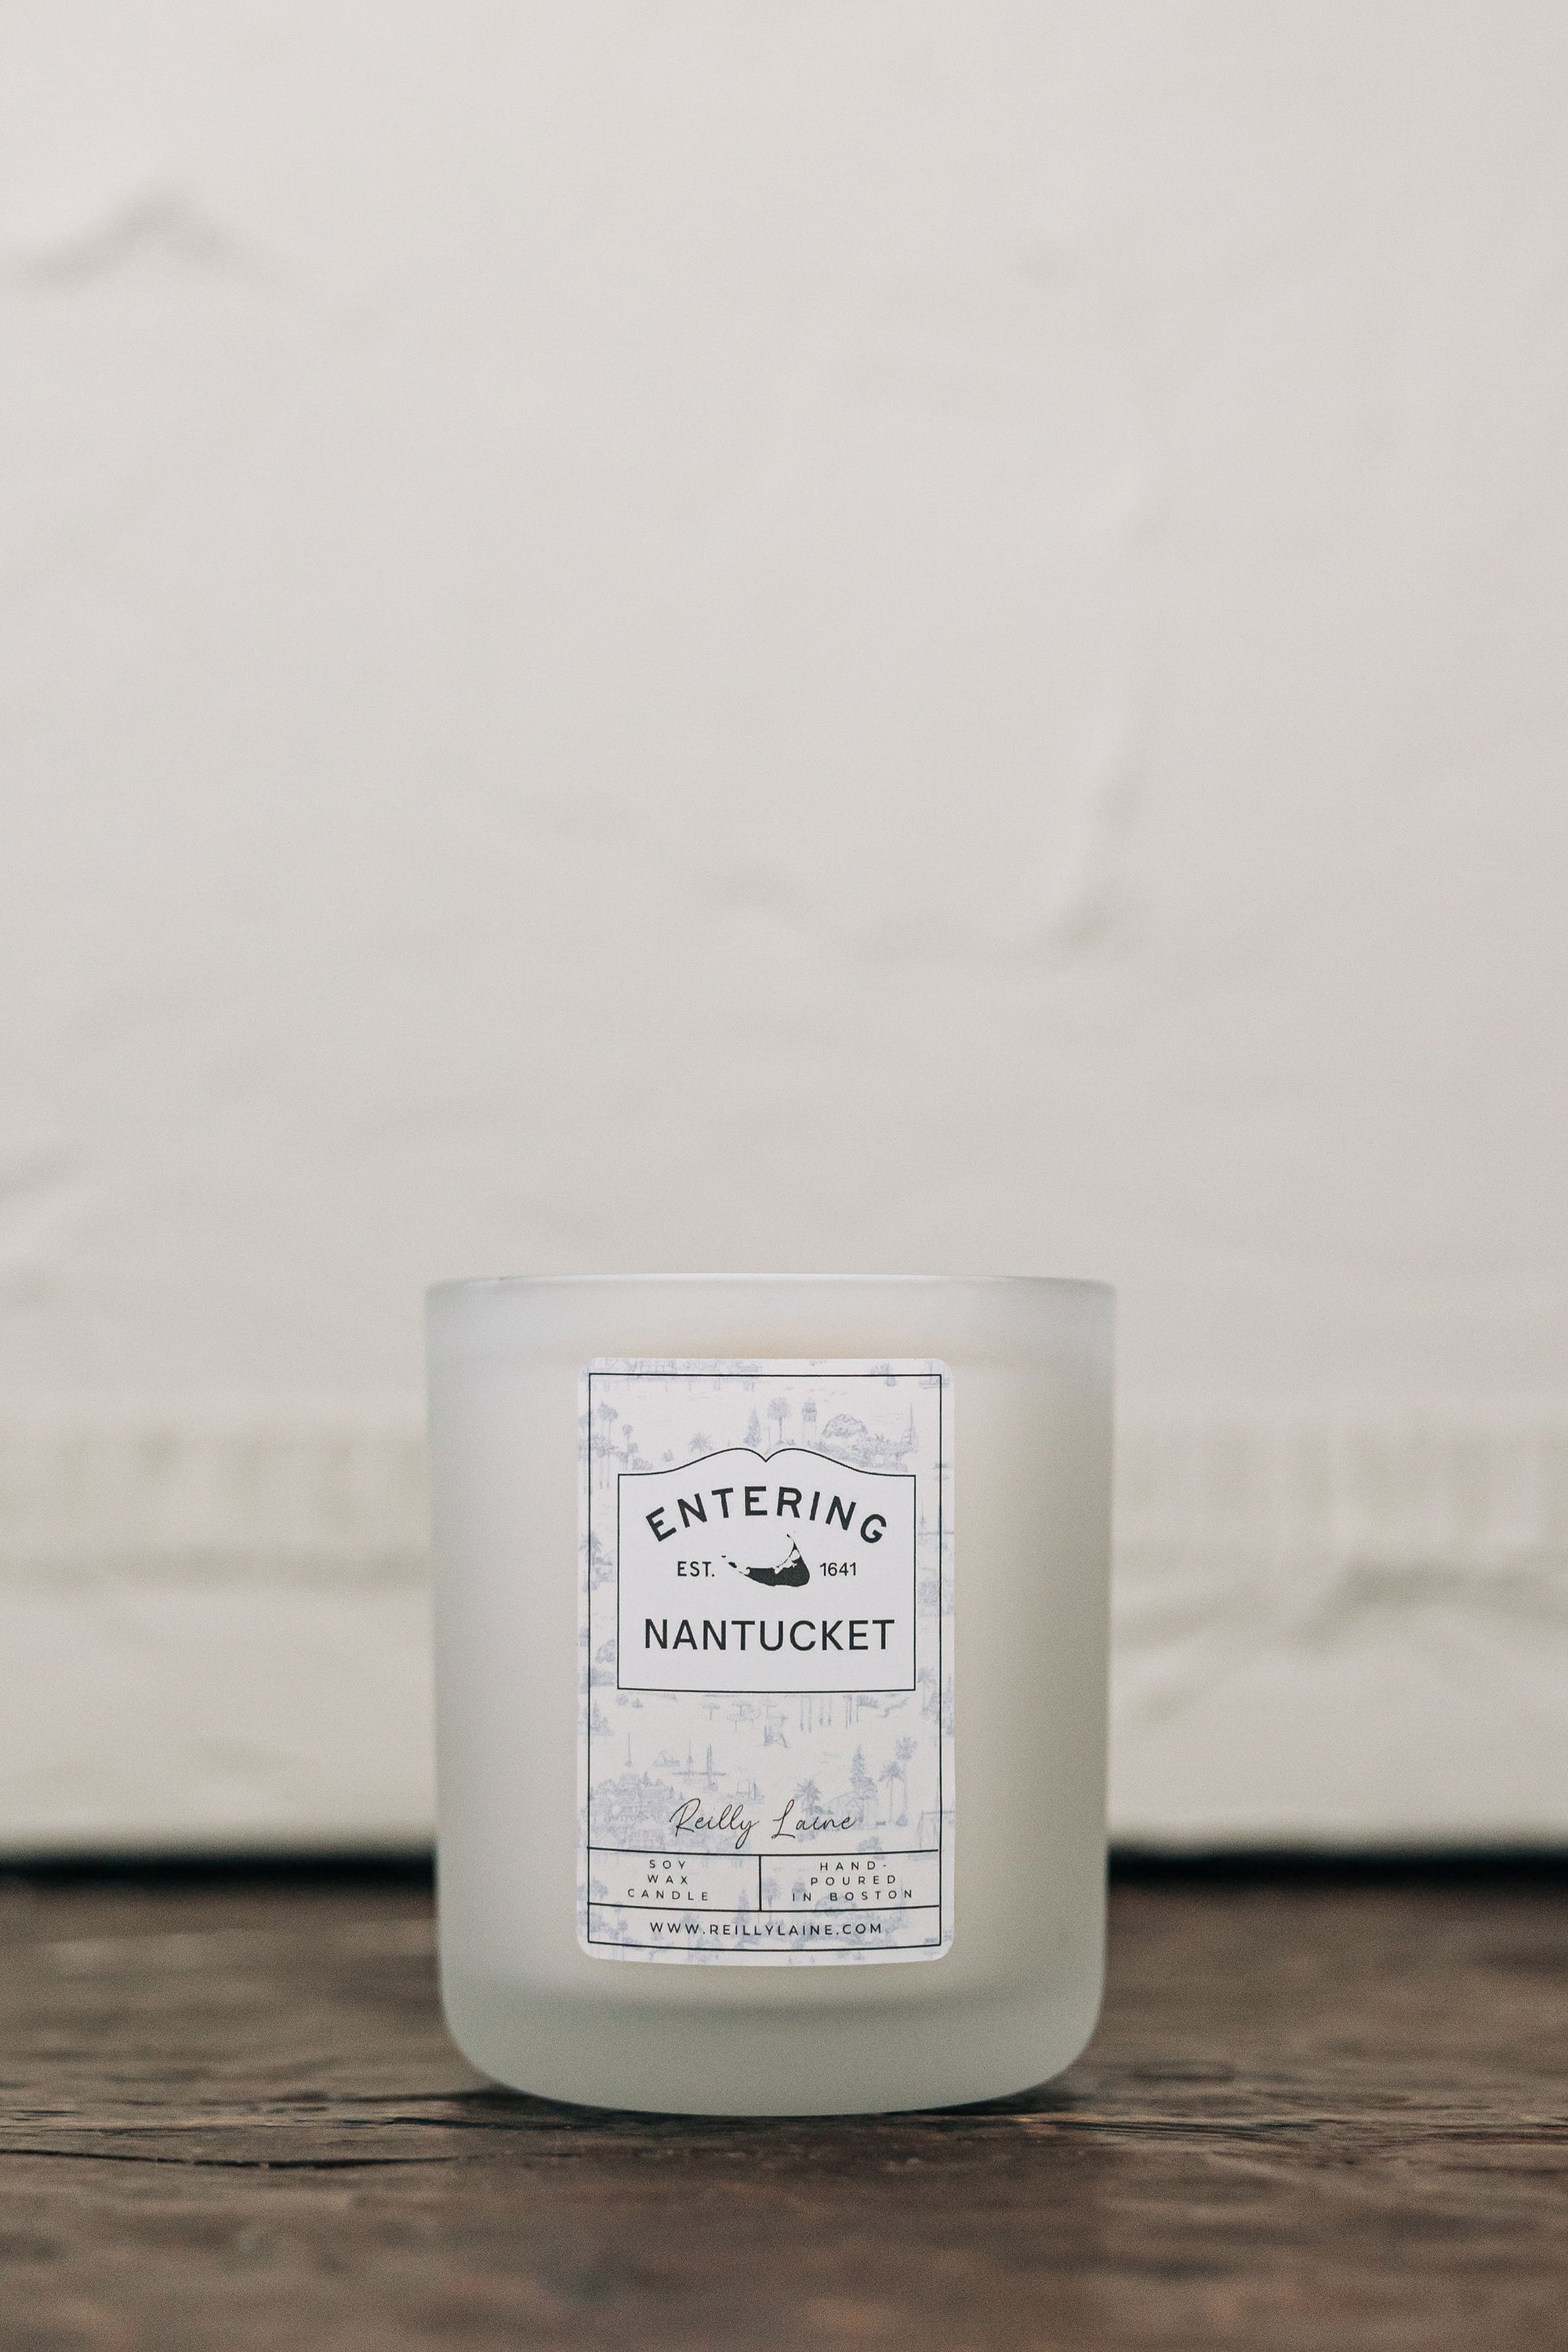 Now Entering: Nantucket Candle Label